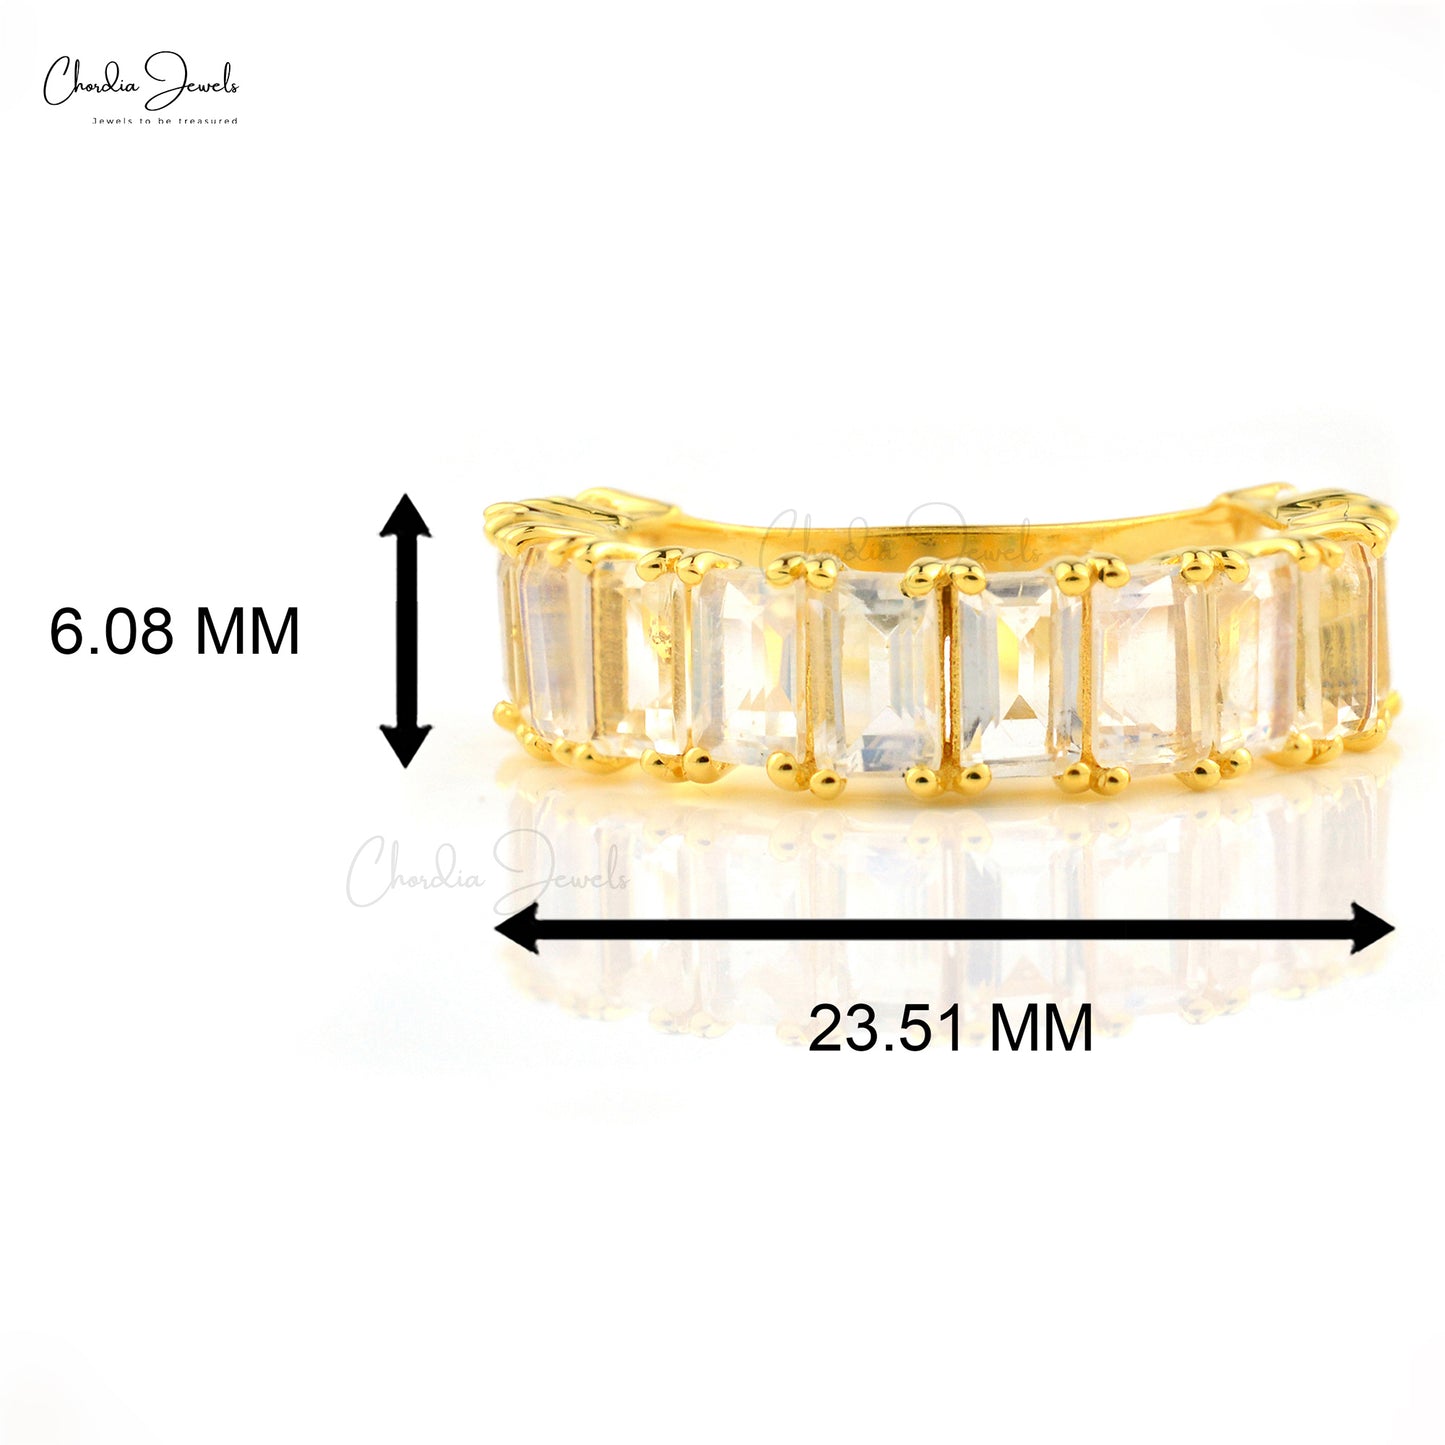 High Polish White Topaz Half Eternity Band In 925 Sterling Silver Emerald Cut Gemstone Jewelry At Offer Price